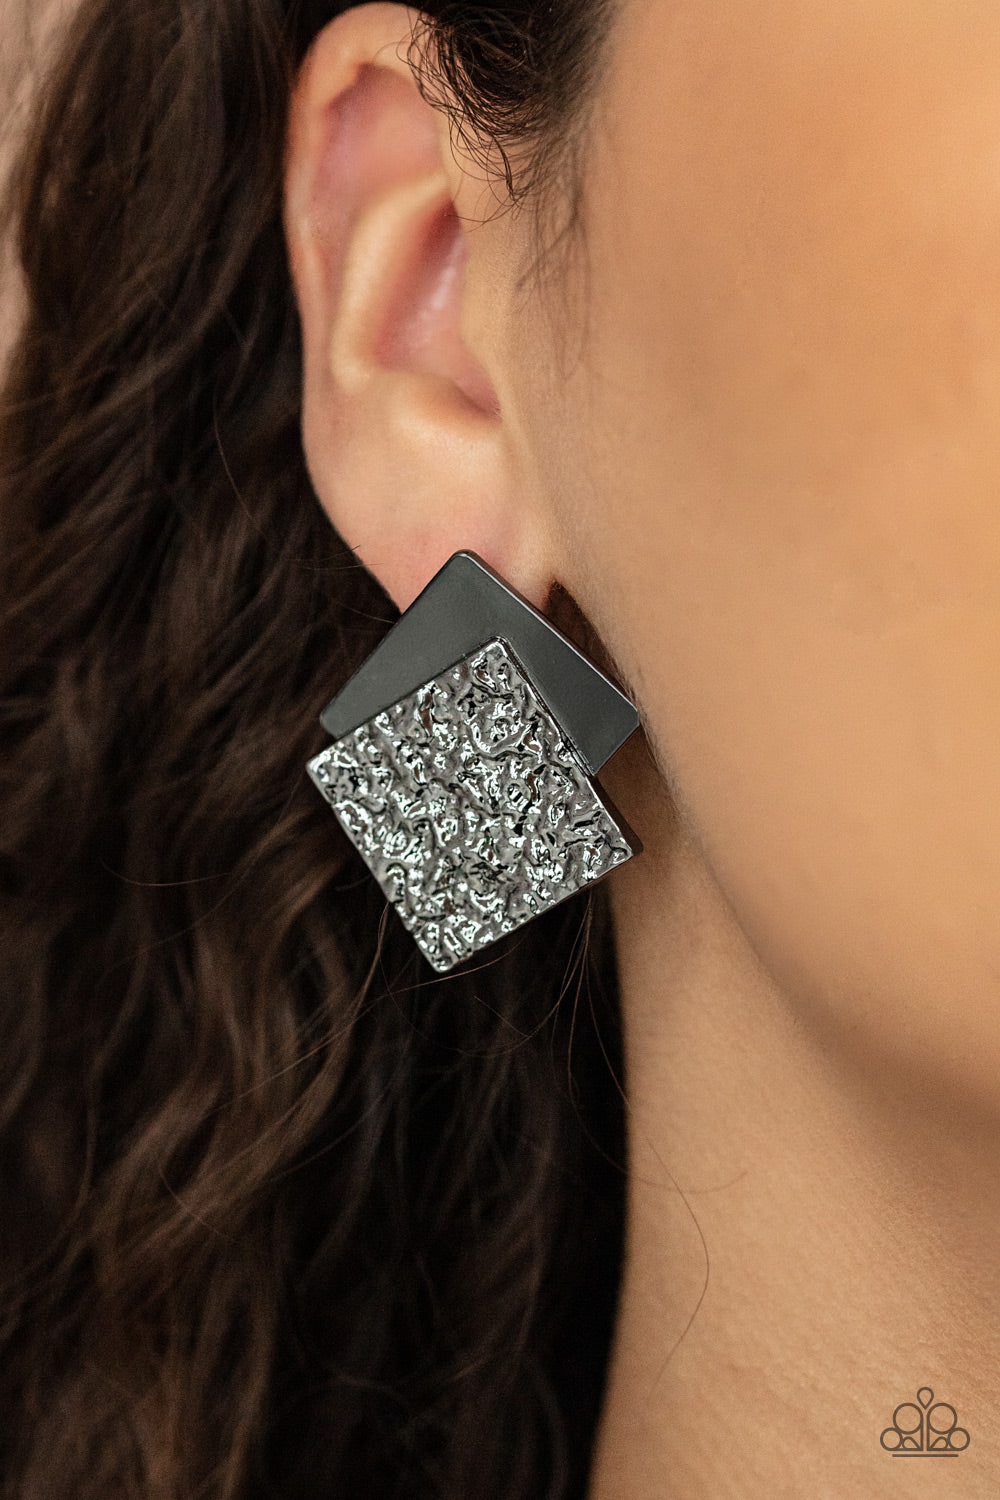 Paparazzi Accessories - Square With Style #E480 - Black Earrings